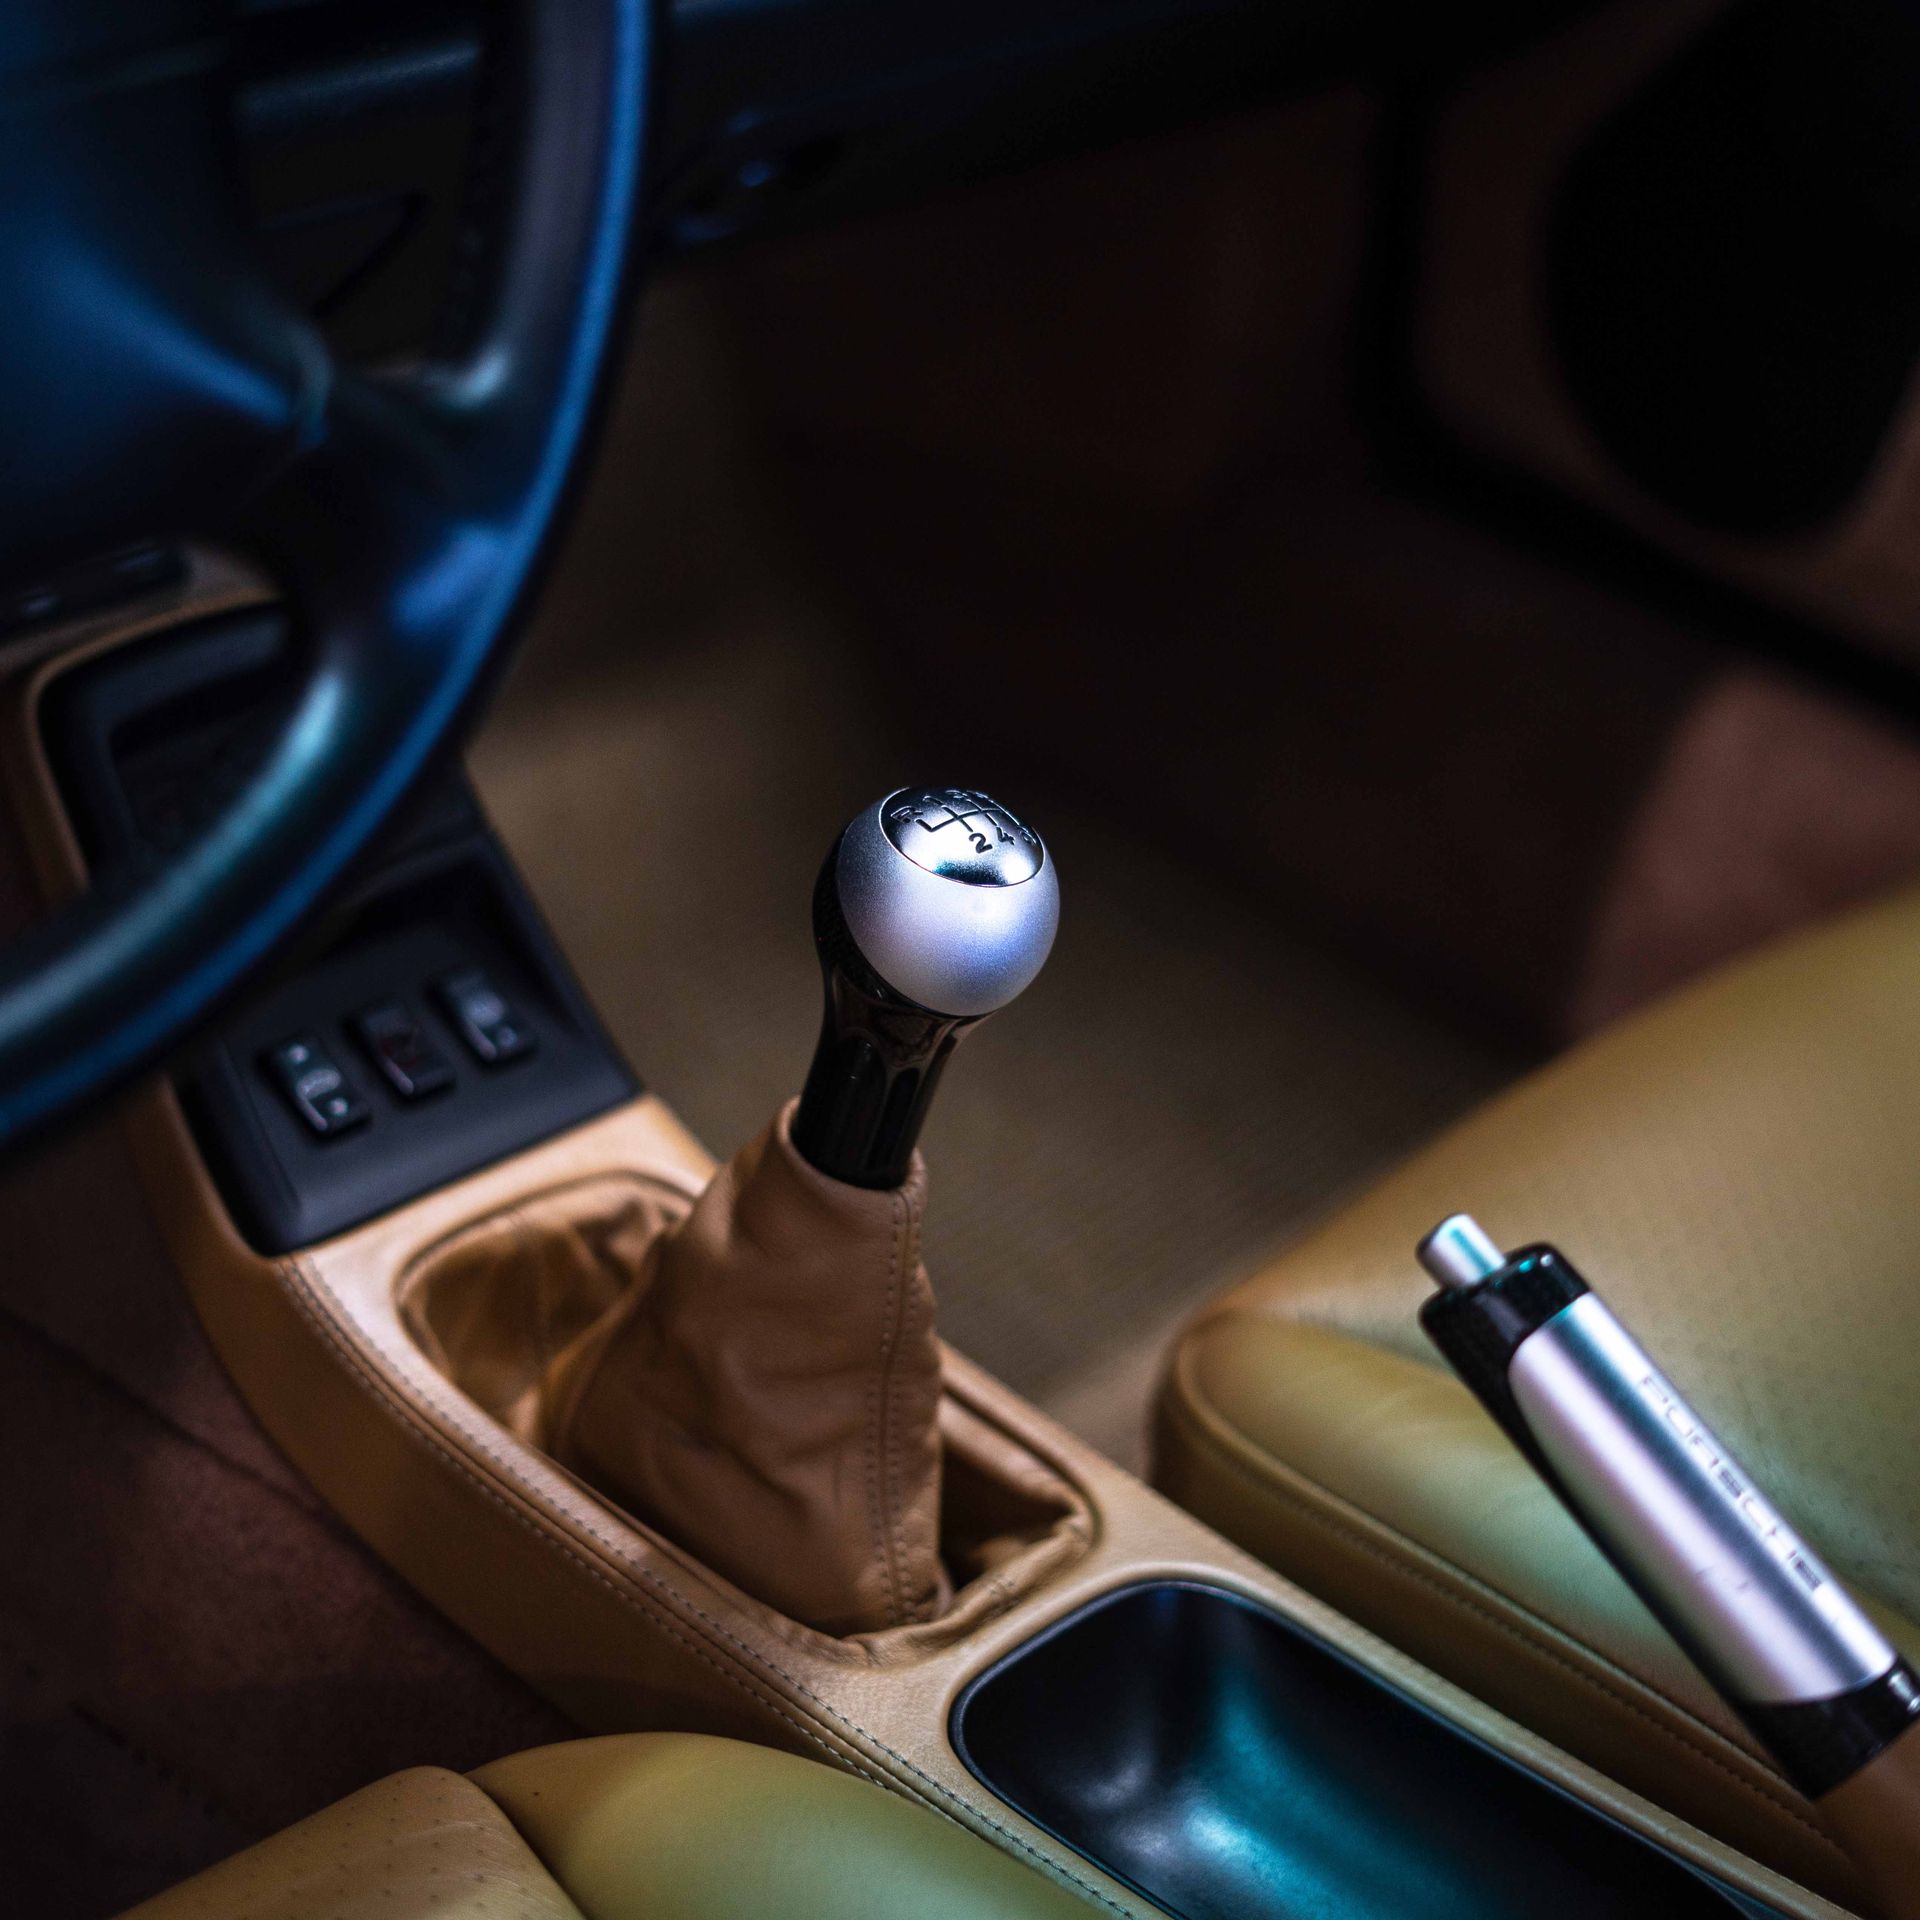 A close up of a shifter in a car